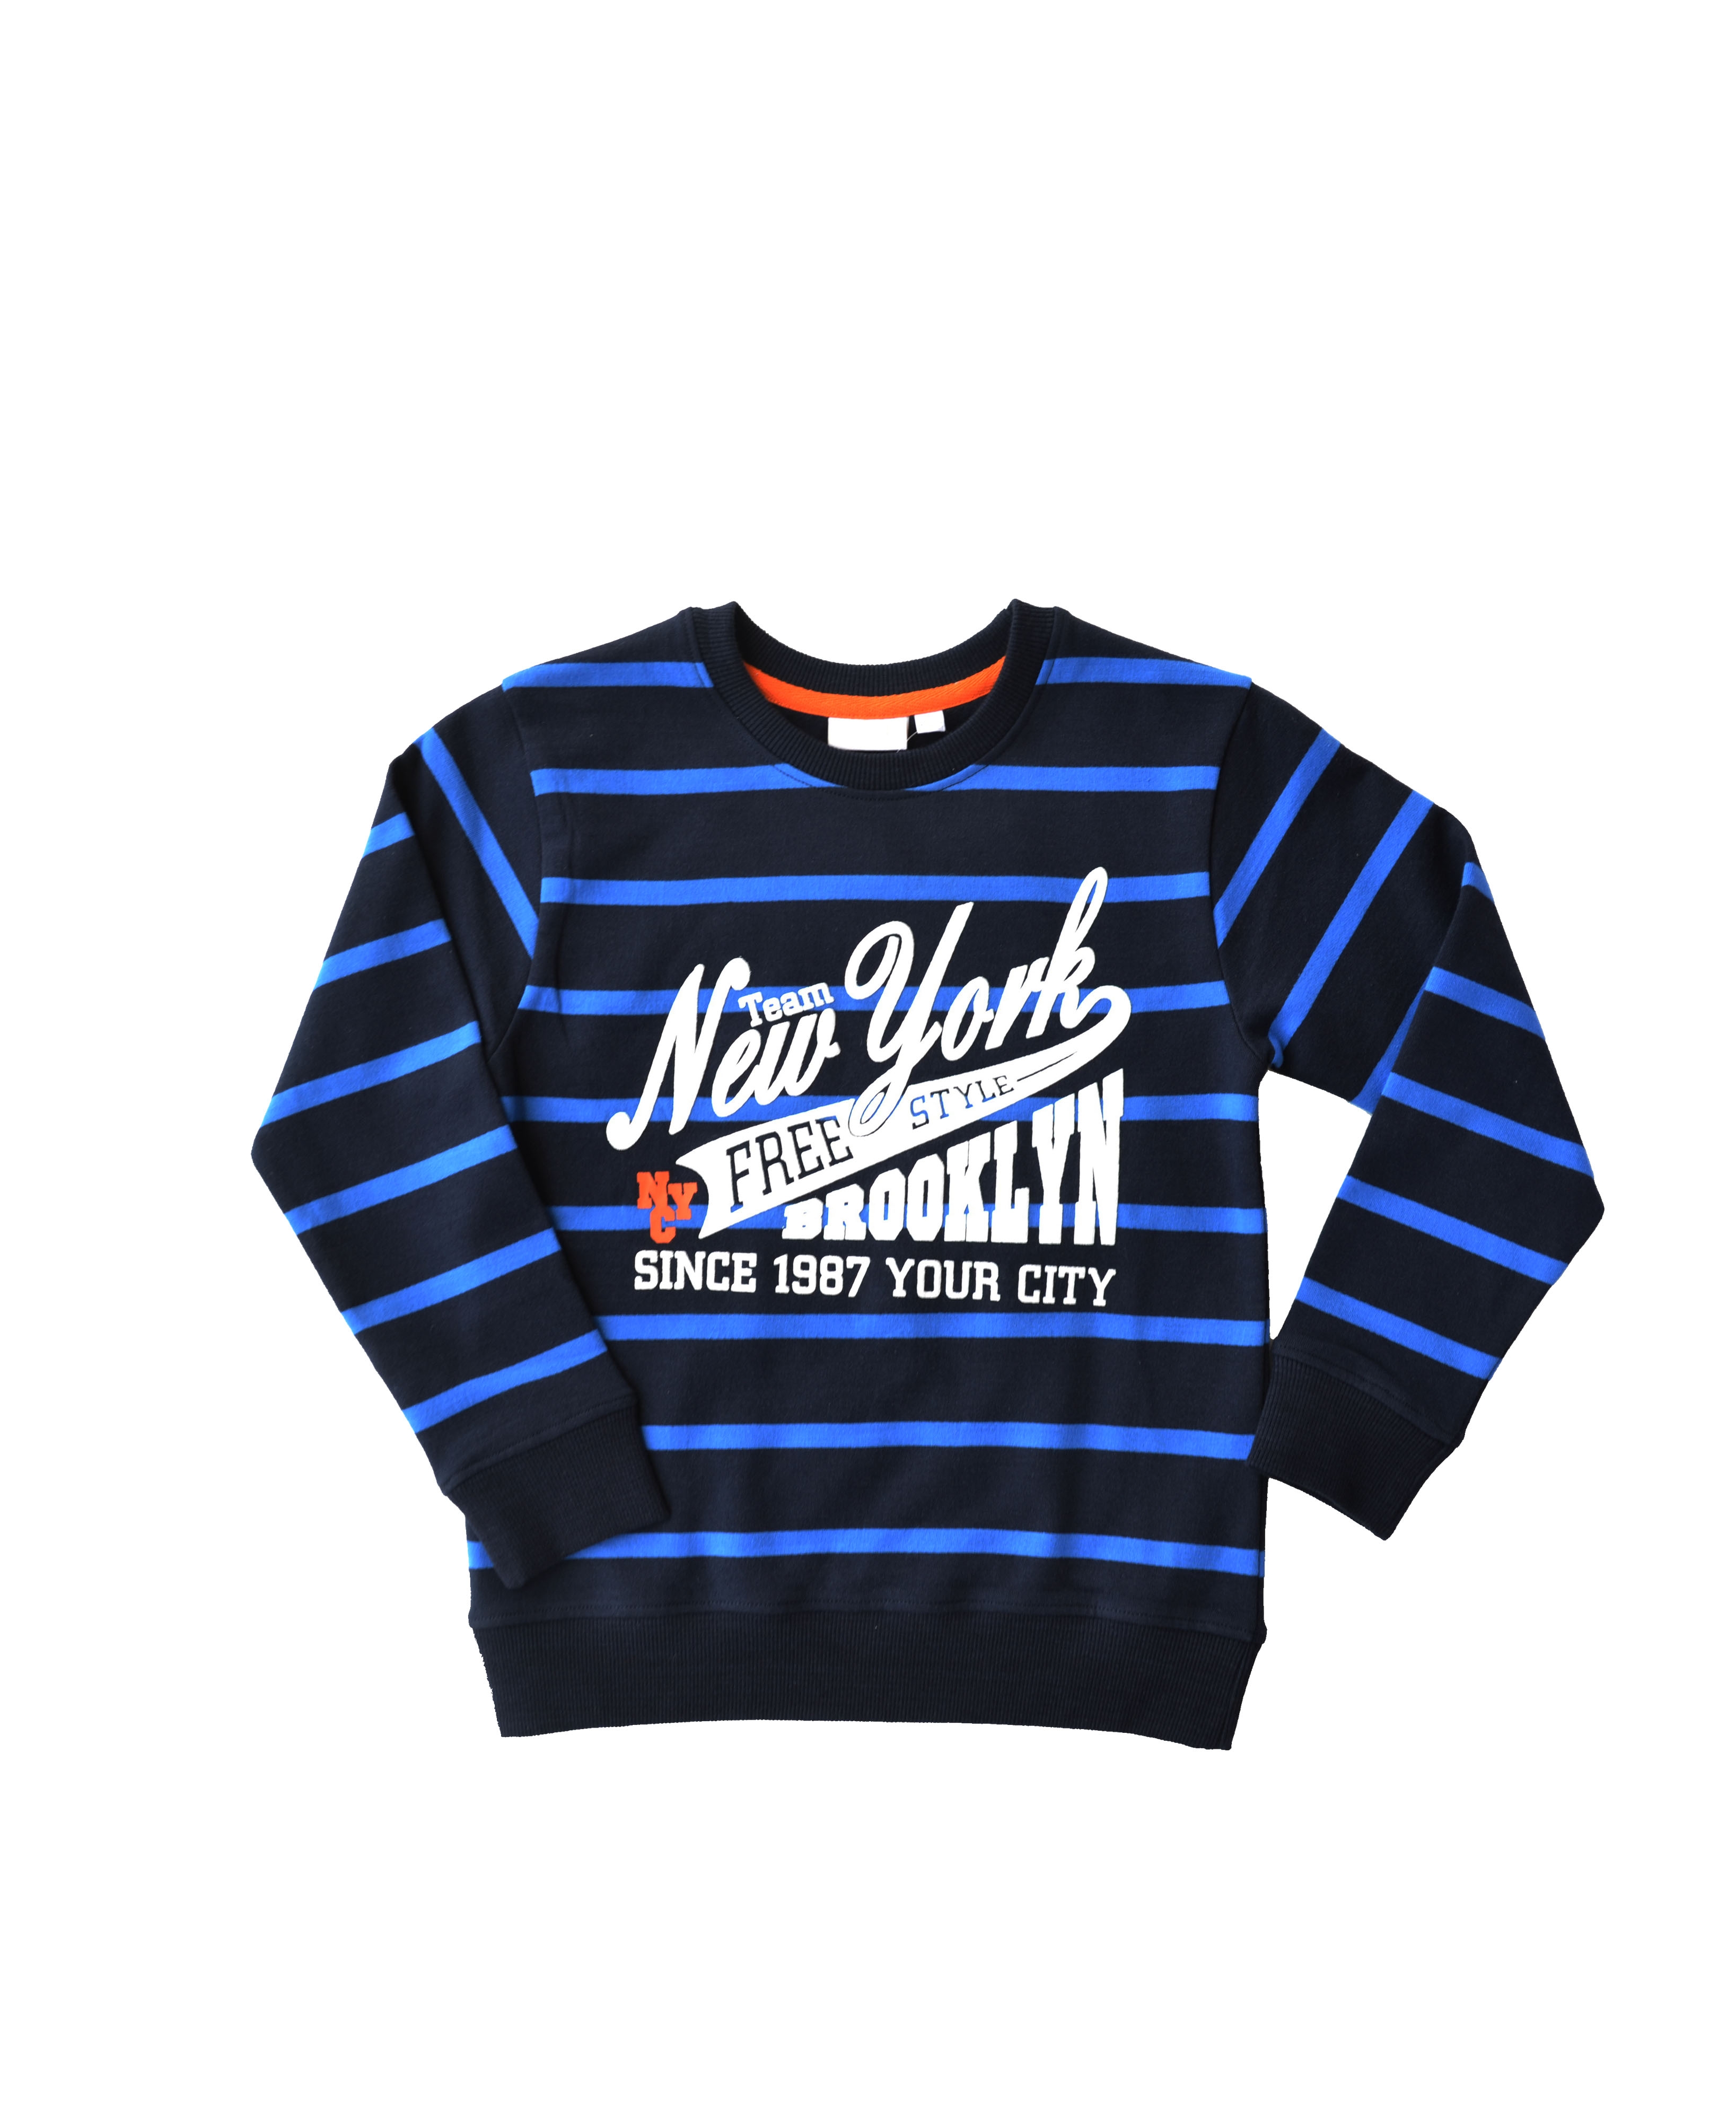 Babeez | New York Brooklyn Print on Navy Stripes Long Sleeves Sweatshirt (French Terry) undefined